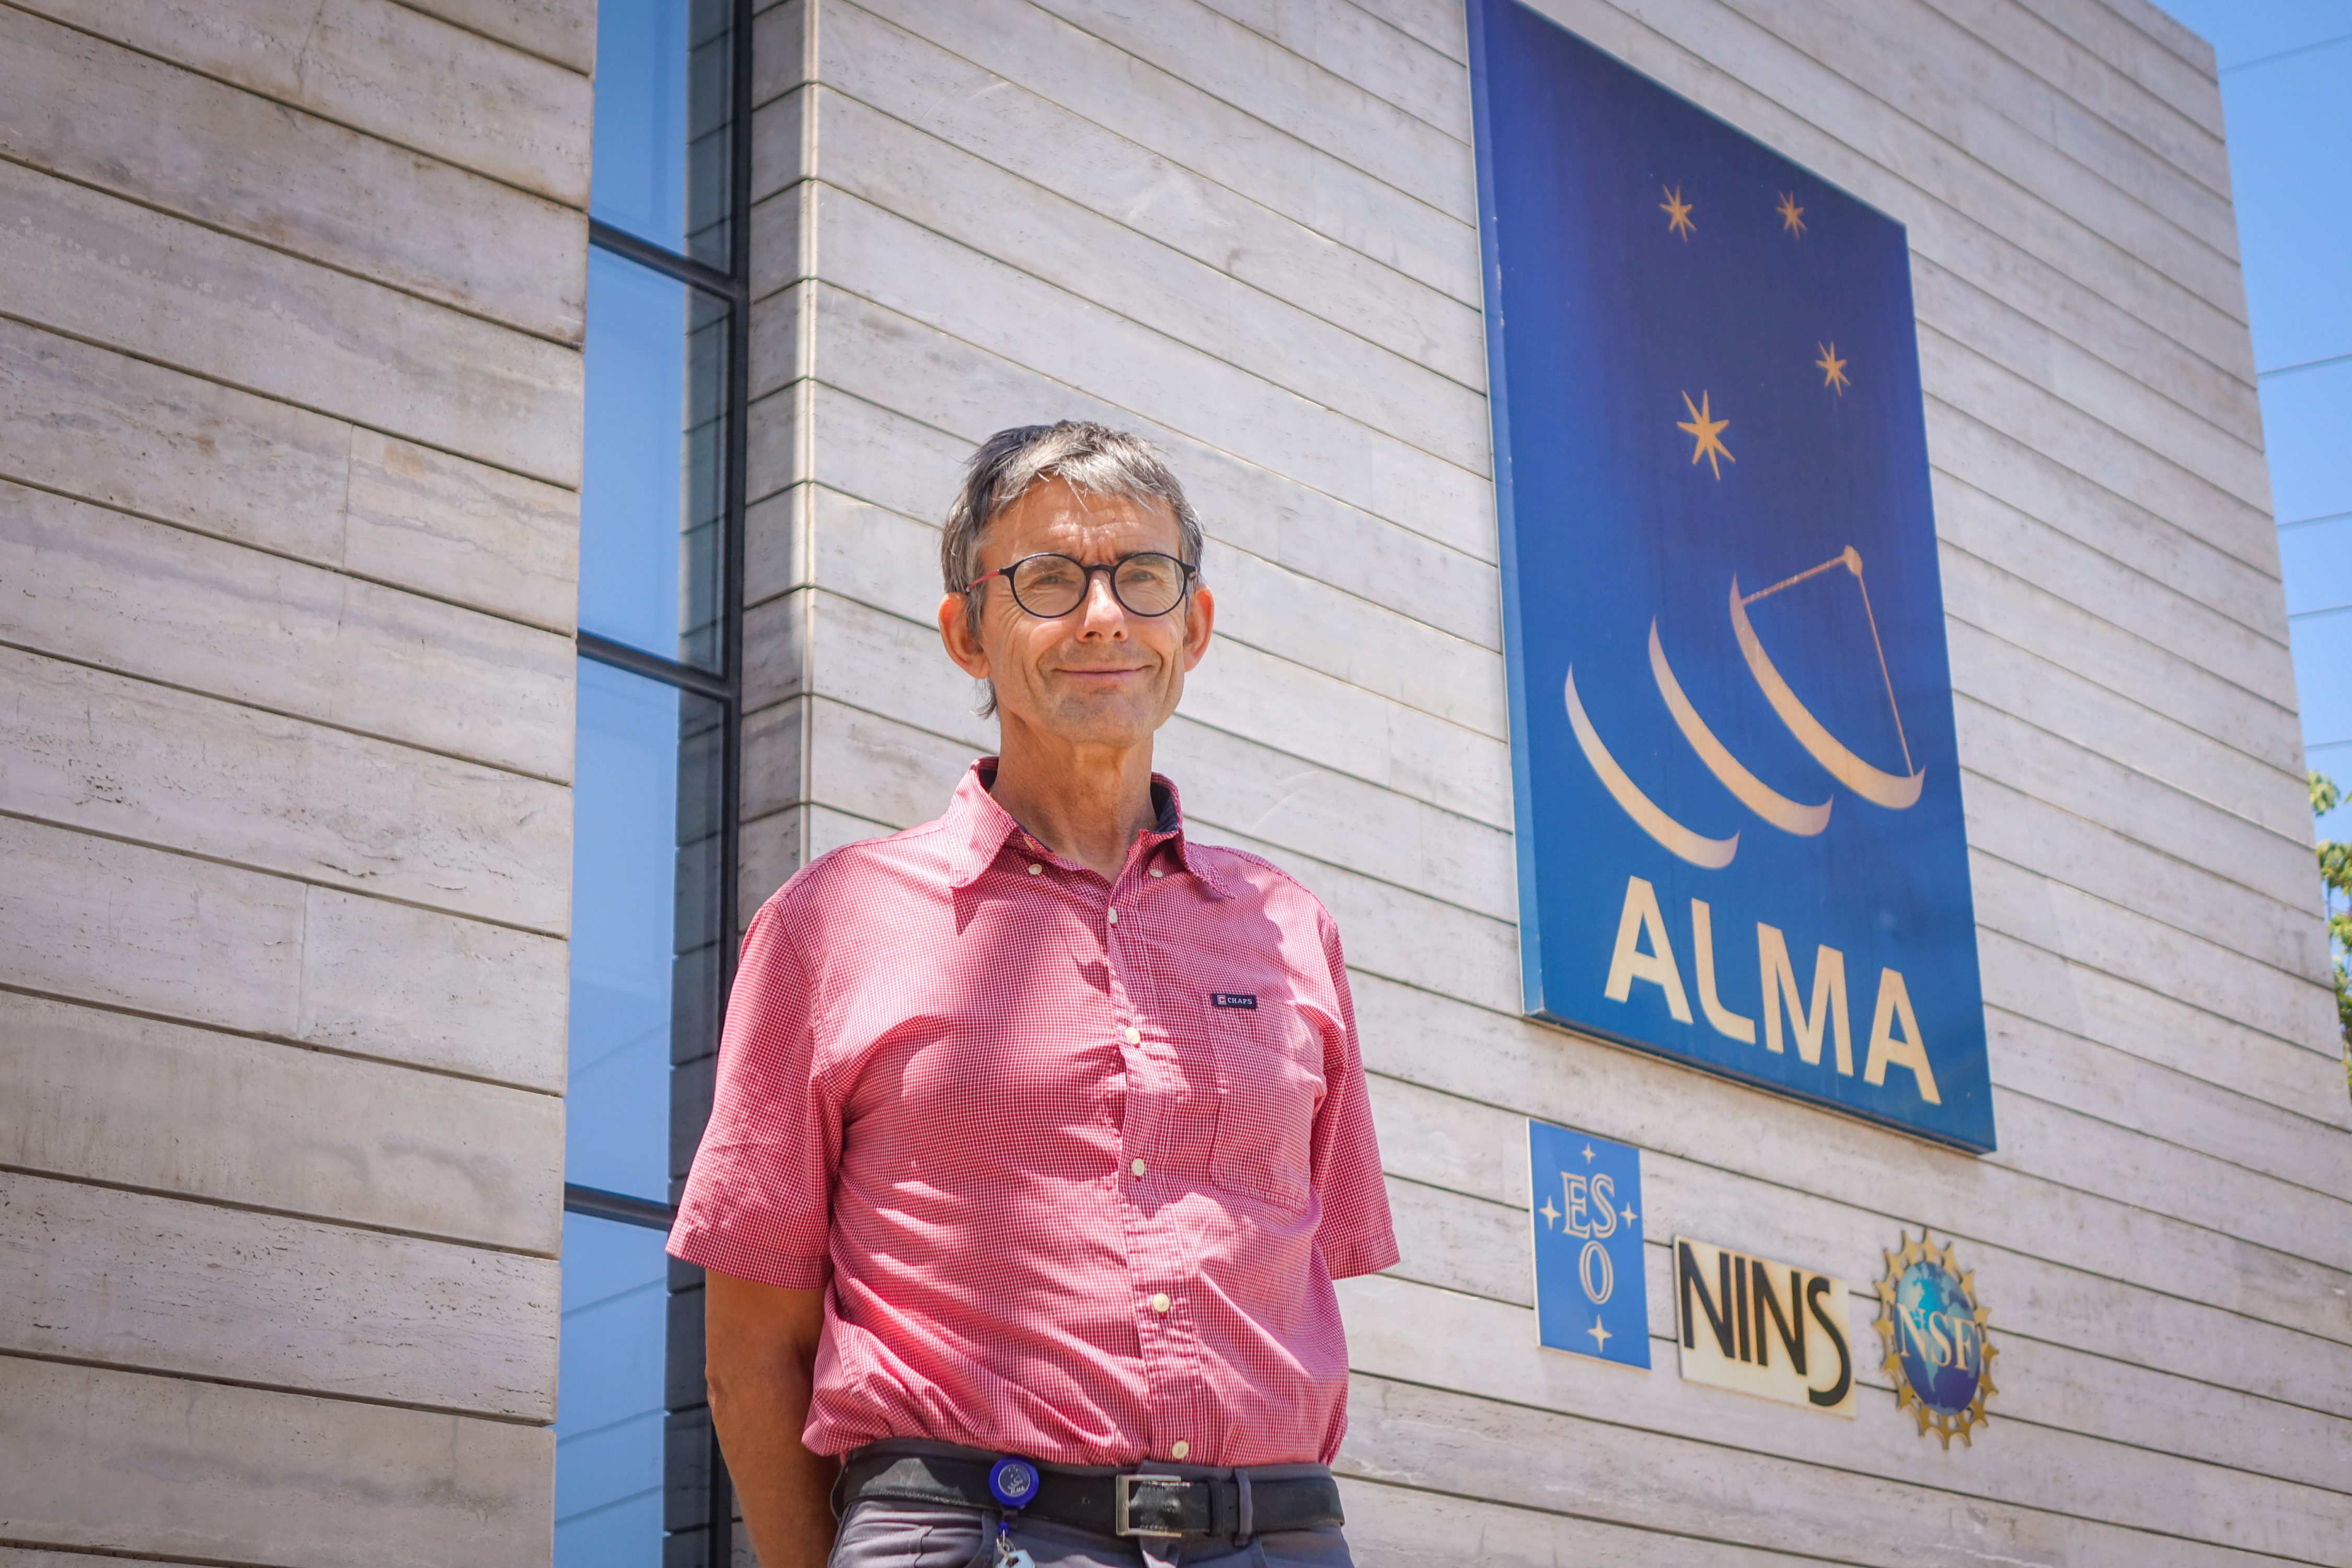 Dr. Dougherty has been the ALMA Director since 2017 and the Board has extended his appointment until February 2028 to achieve the ambitious goals of the ALMA 2030 development roadmap and consolidating ALMA as a state-of-the-art observatory. Credit: D. Fernández - ALMA (ESO/NAOJ/NRAO)